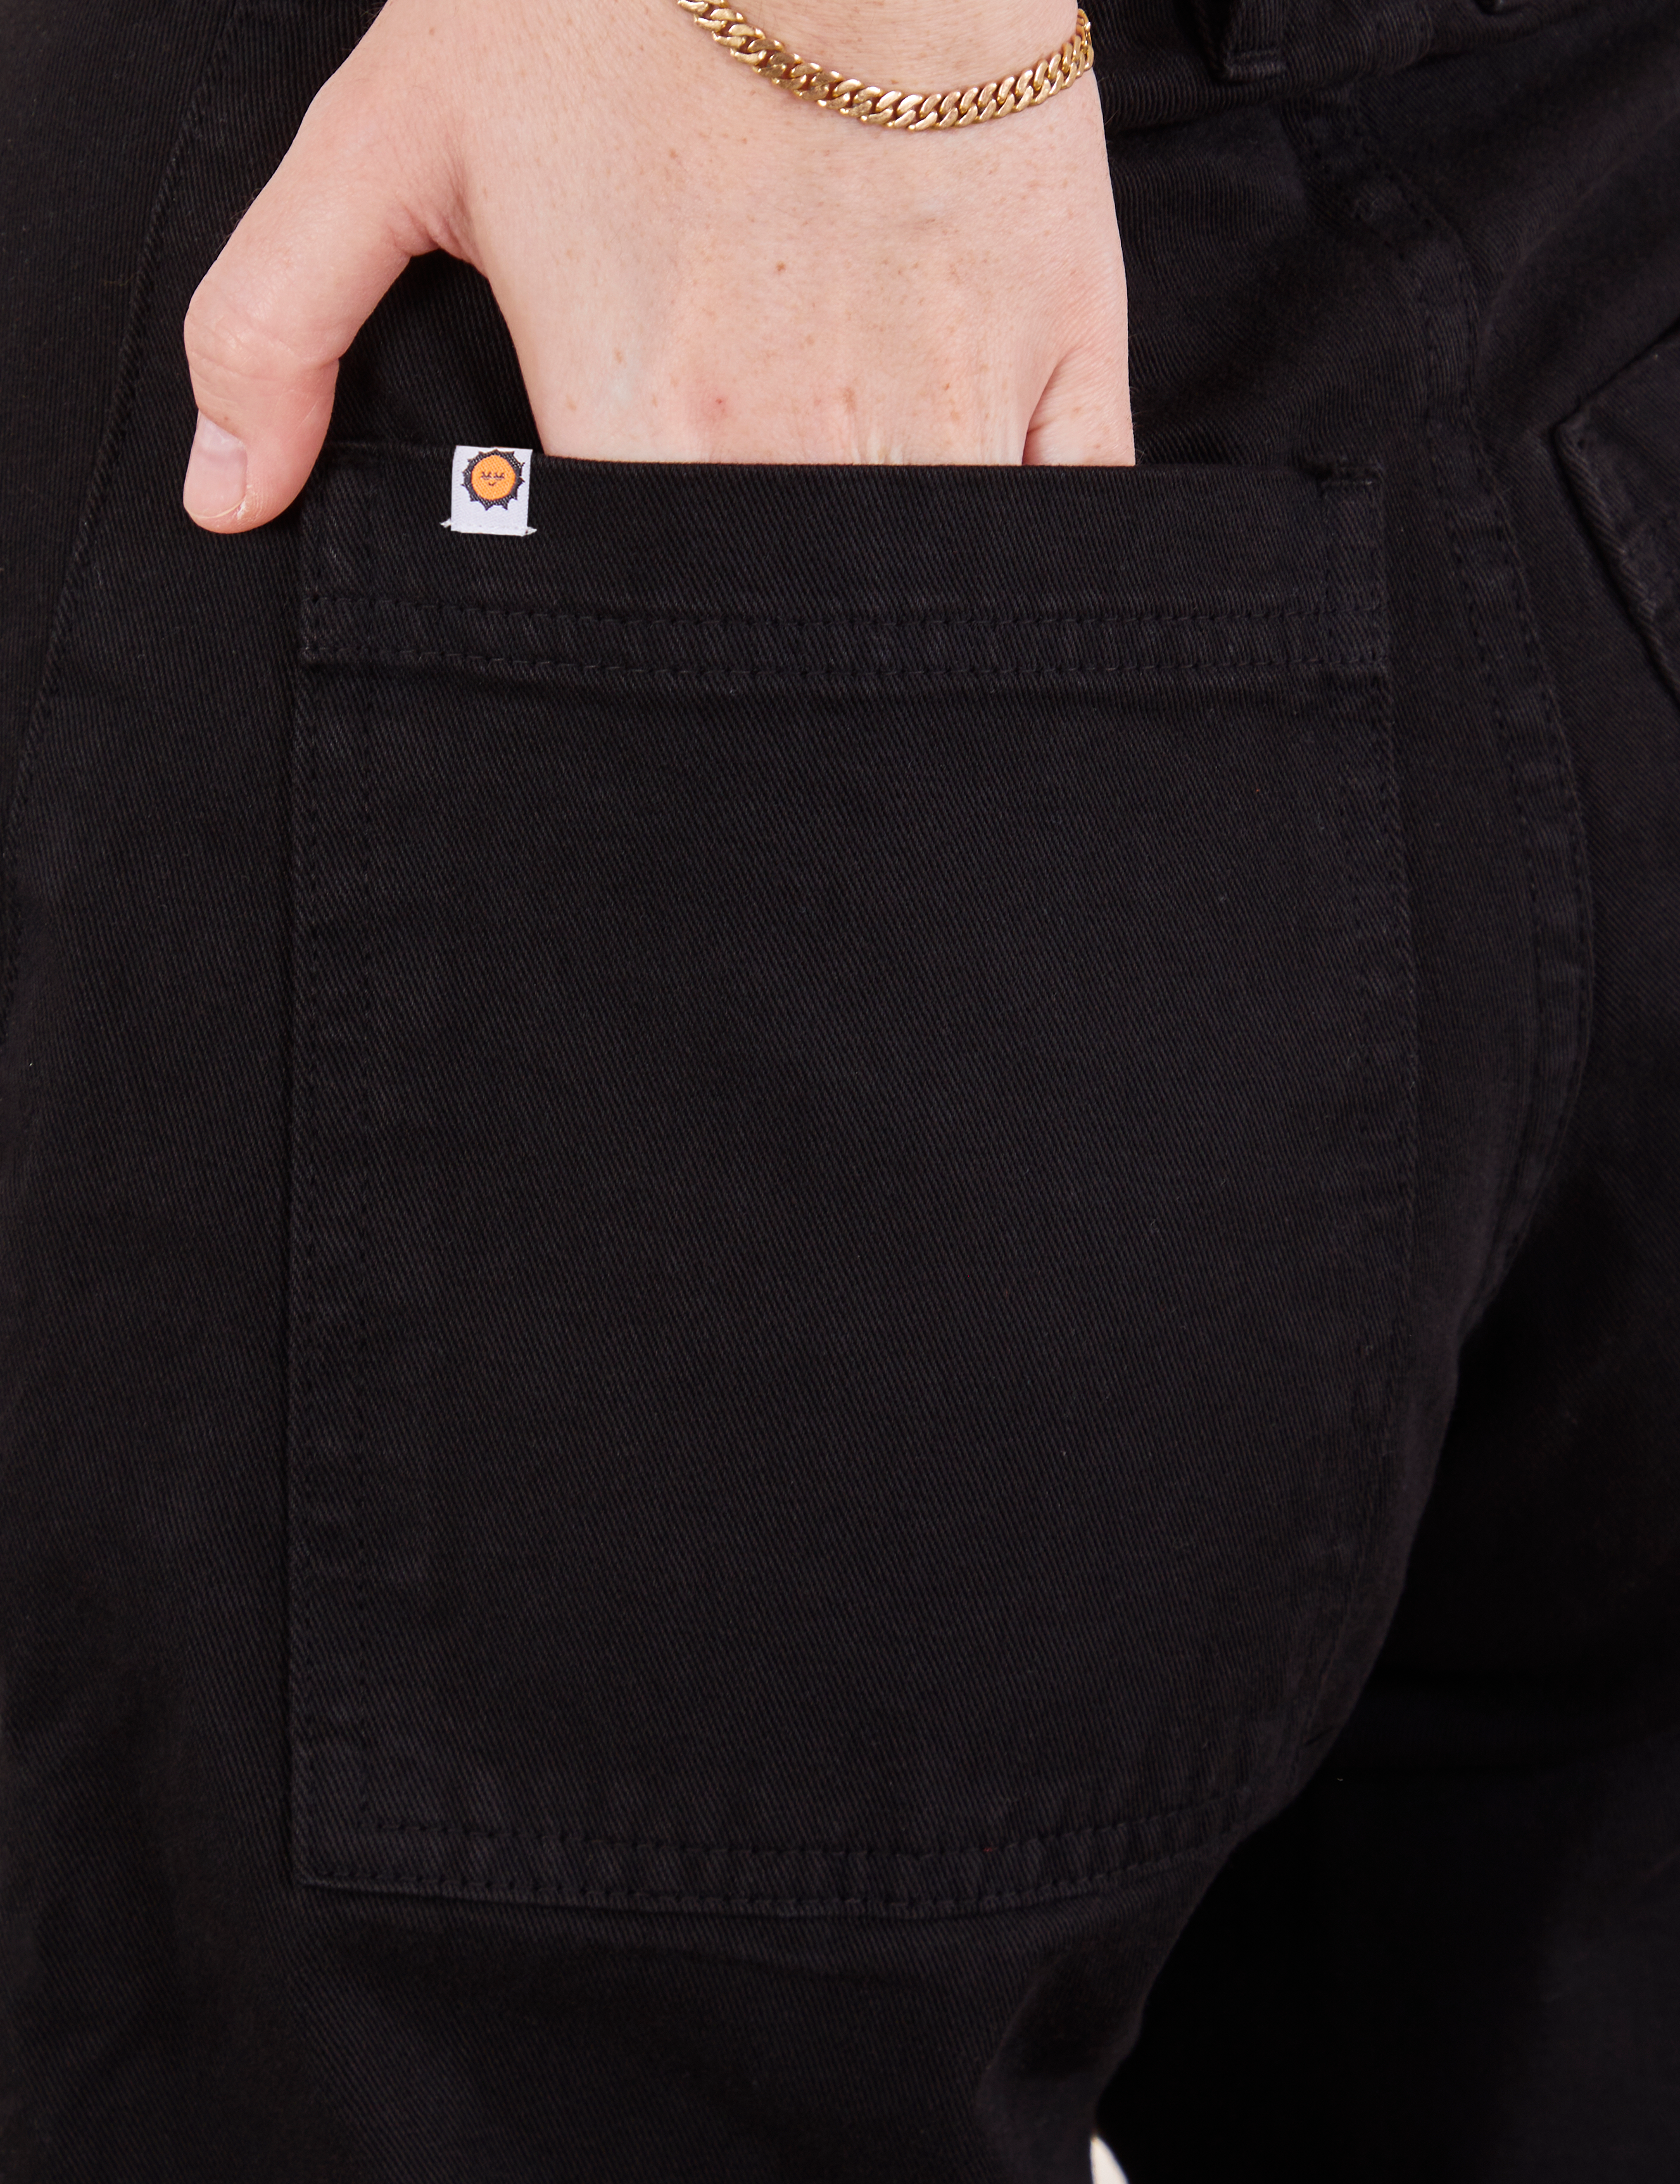 Petite Pencil Pants in Basic Black back pocket close up. Hana has her hand in the pocket.